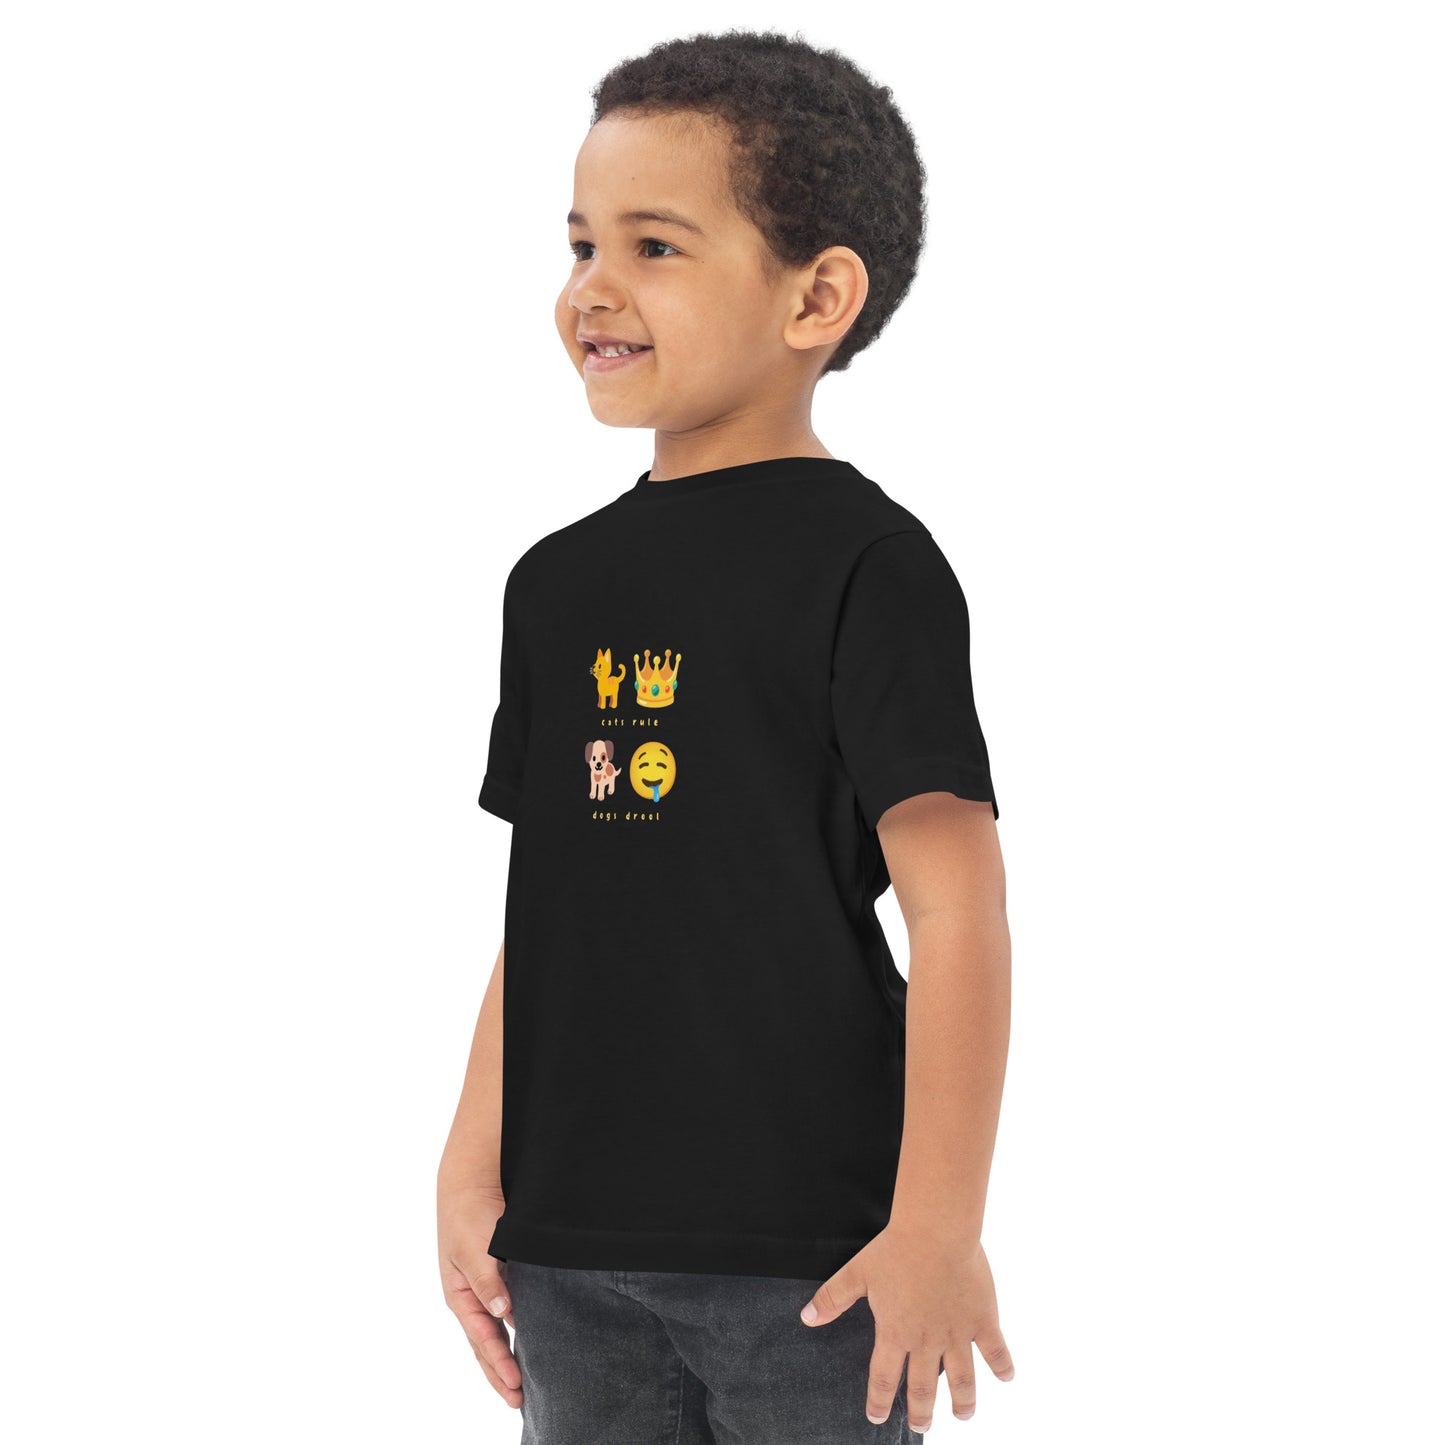 Cats Rule Toddler Tee